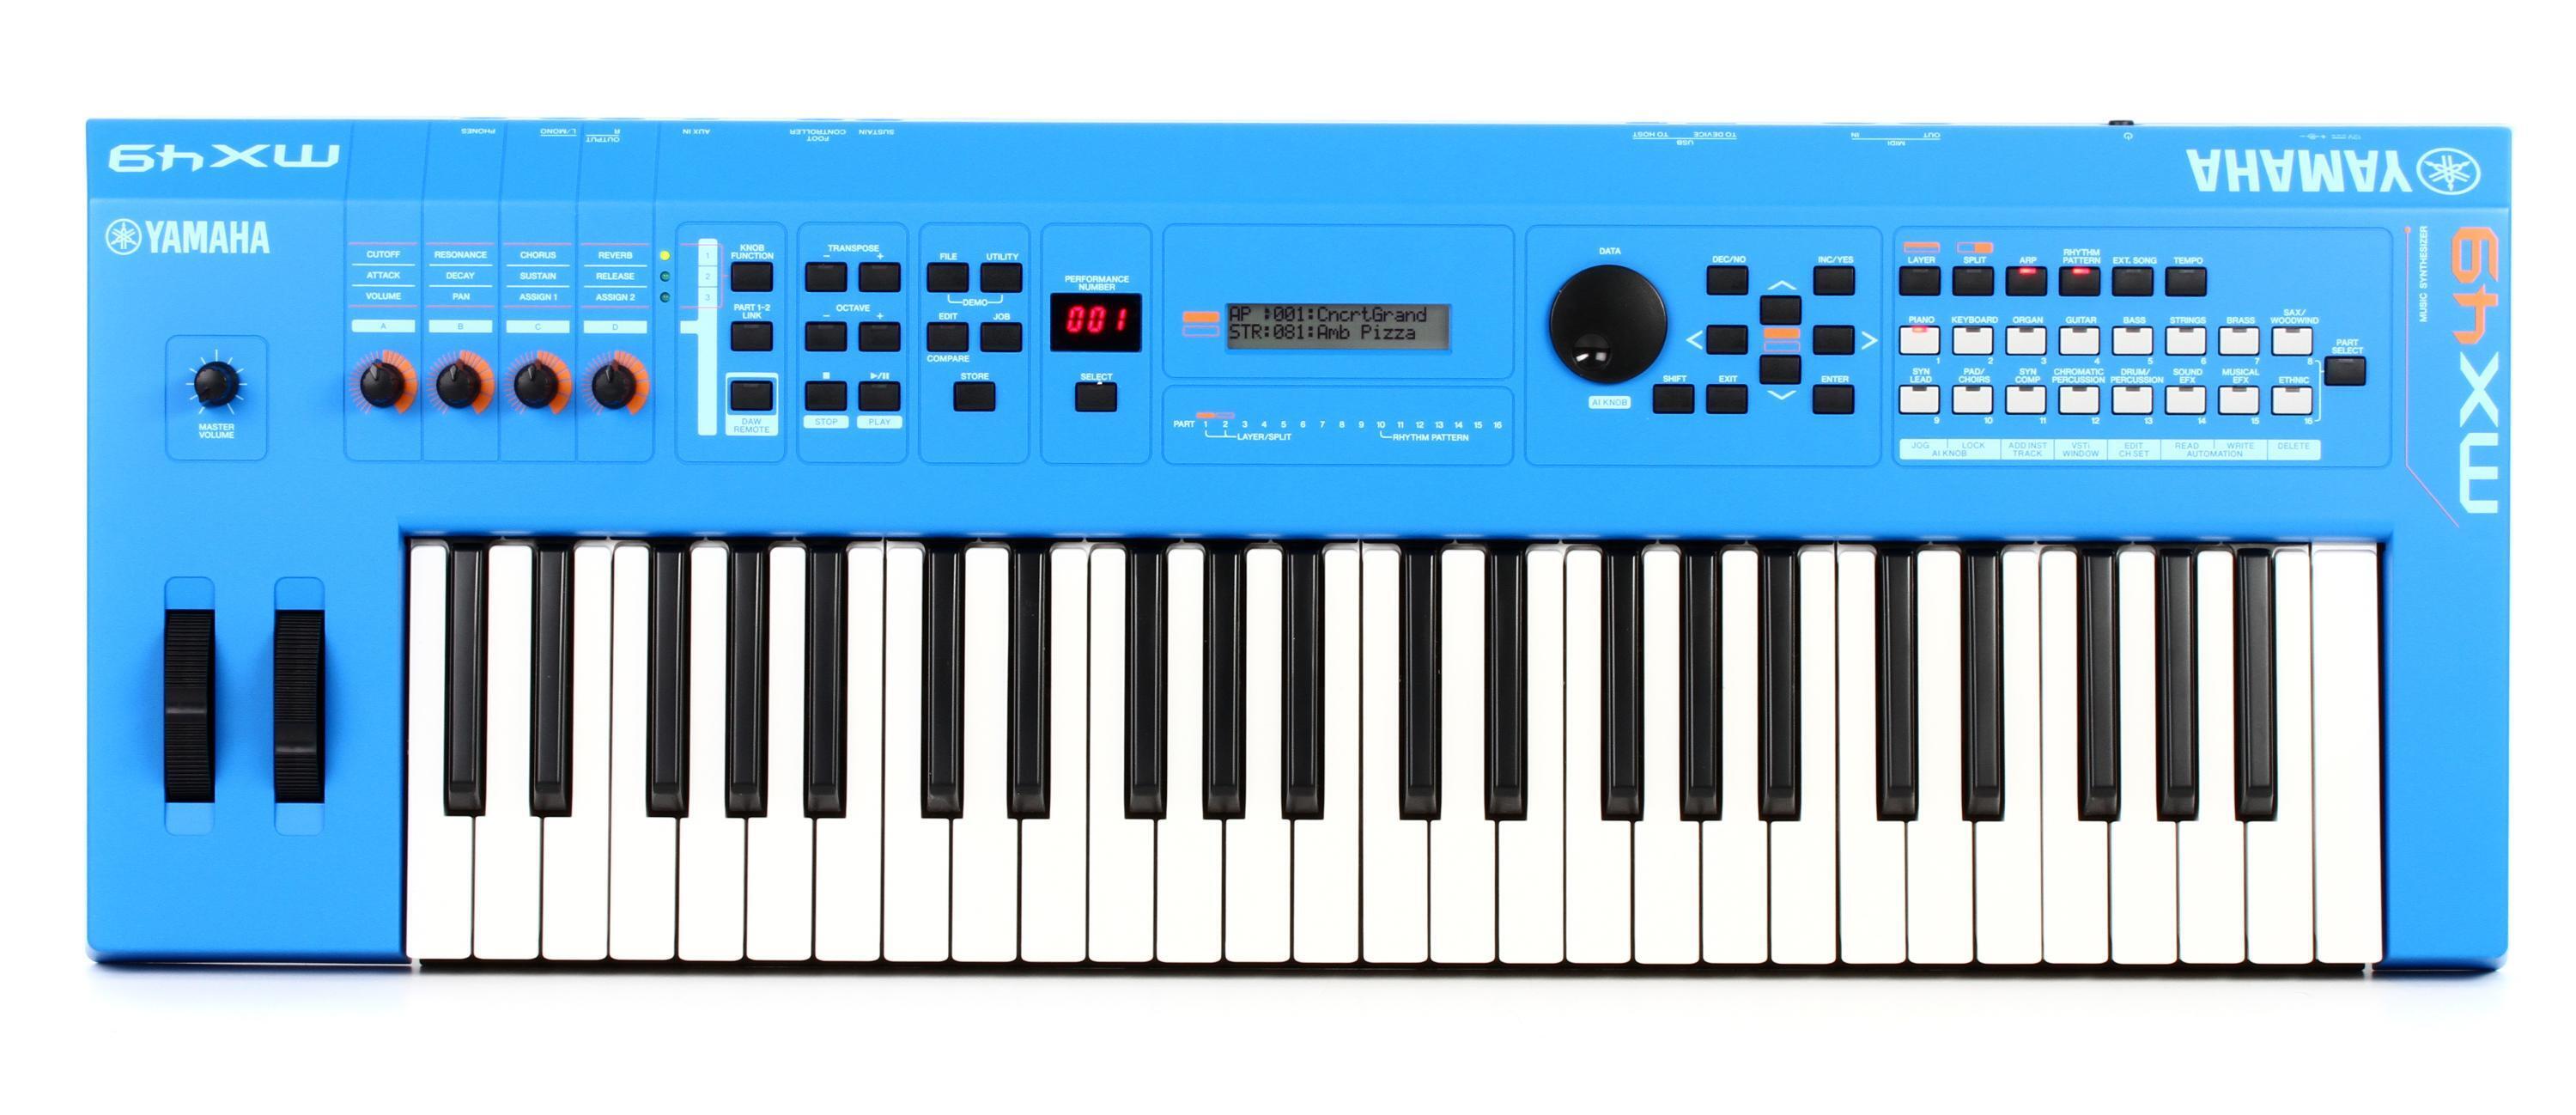 Yamaha MX49 Synth/Controller - Blue | Sweetwater